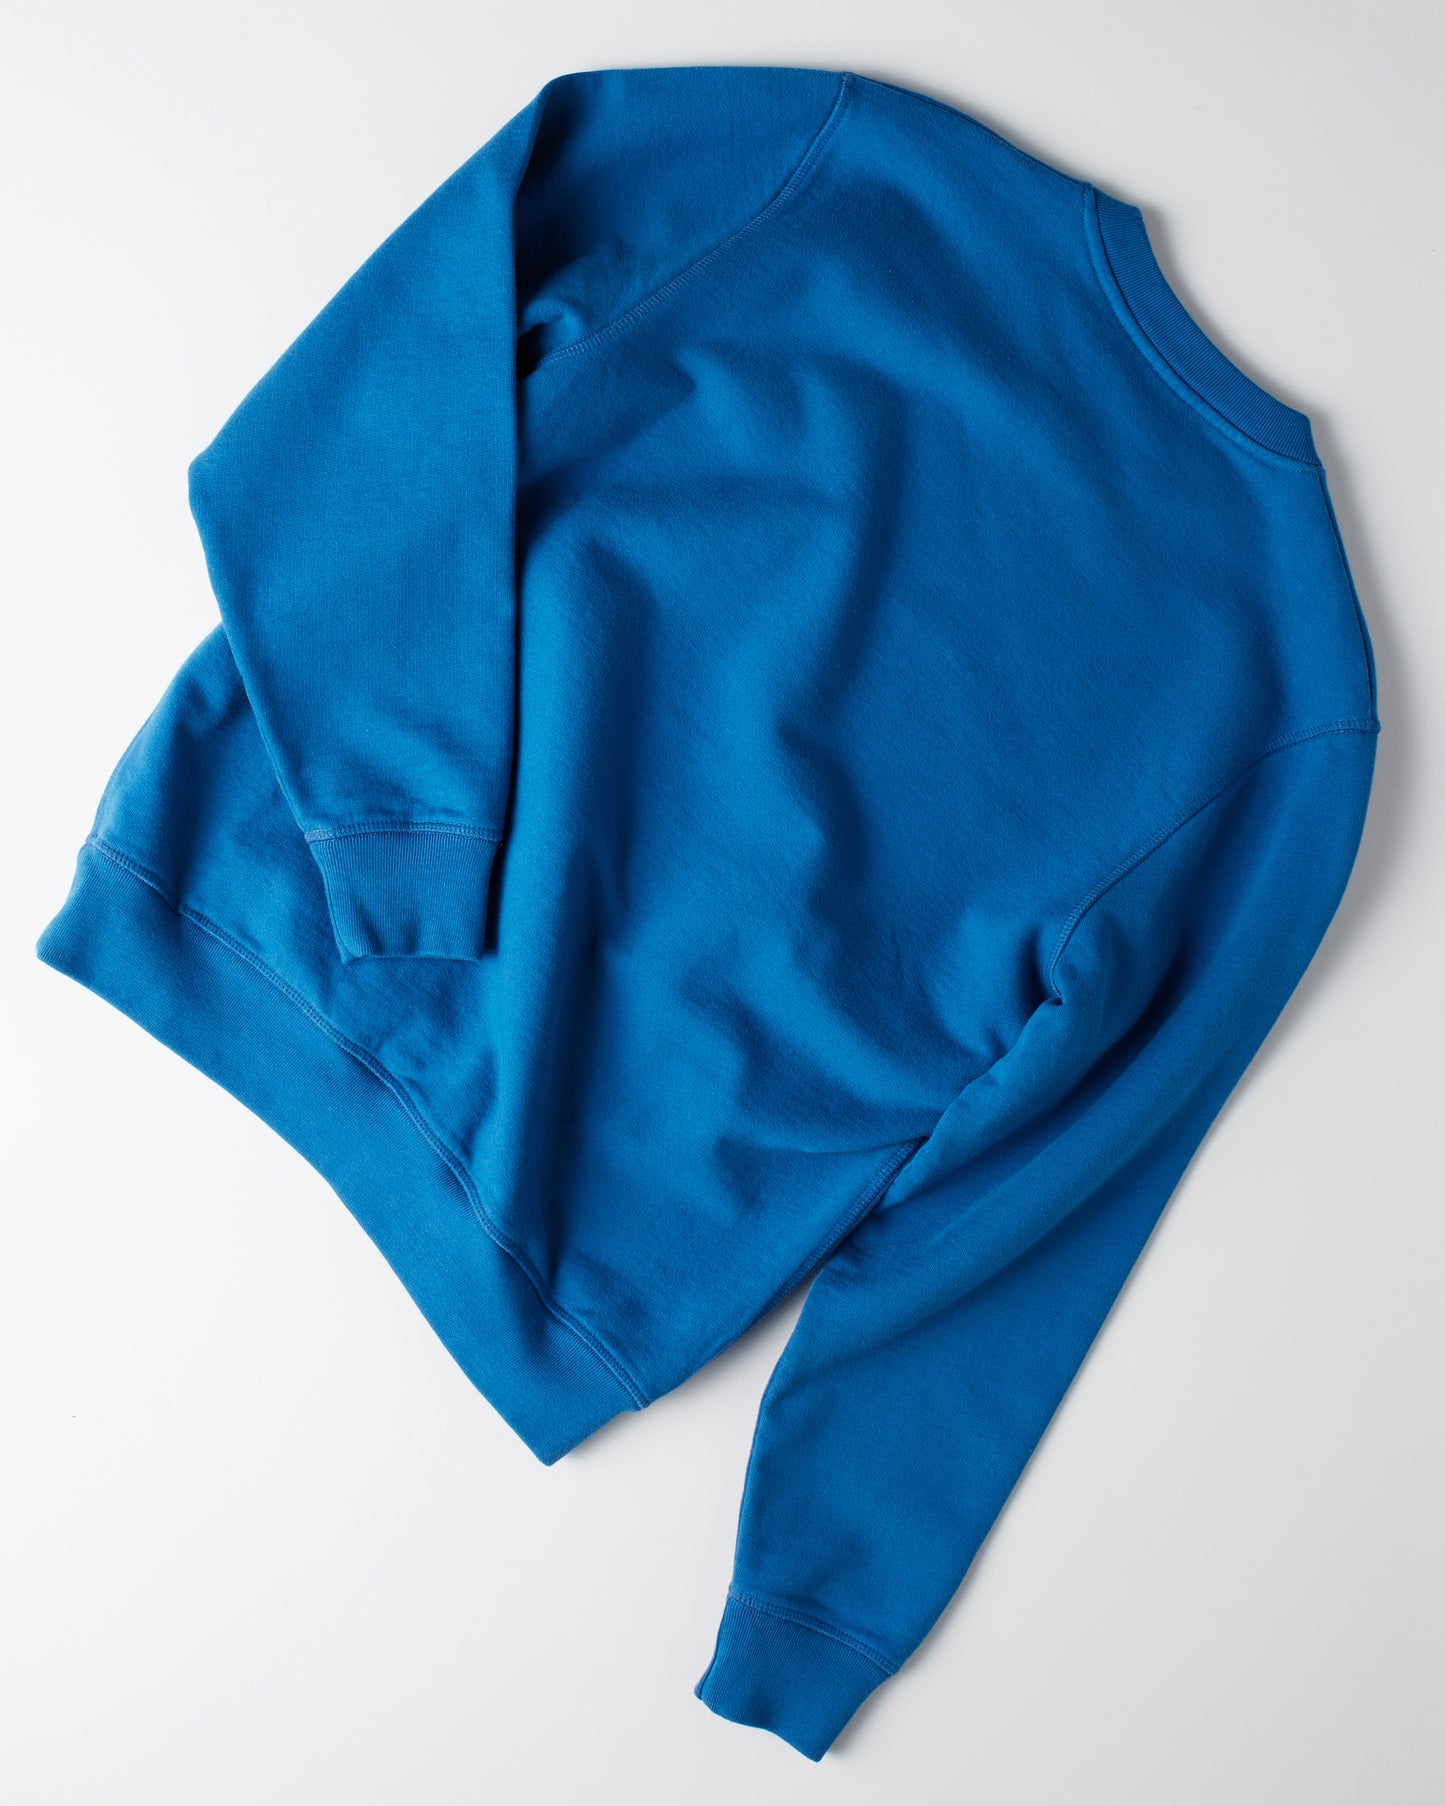 By Parra Wheel Chested Bird Crewneck Sweater Blue